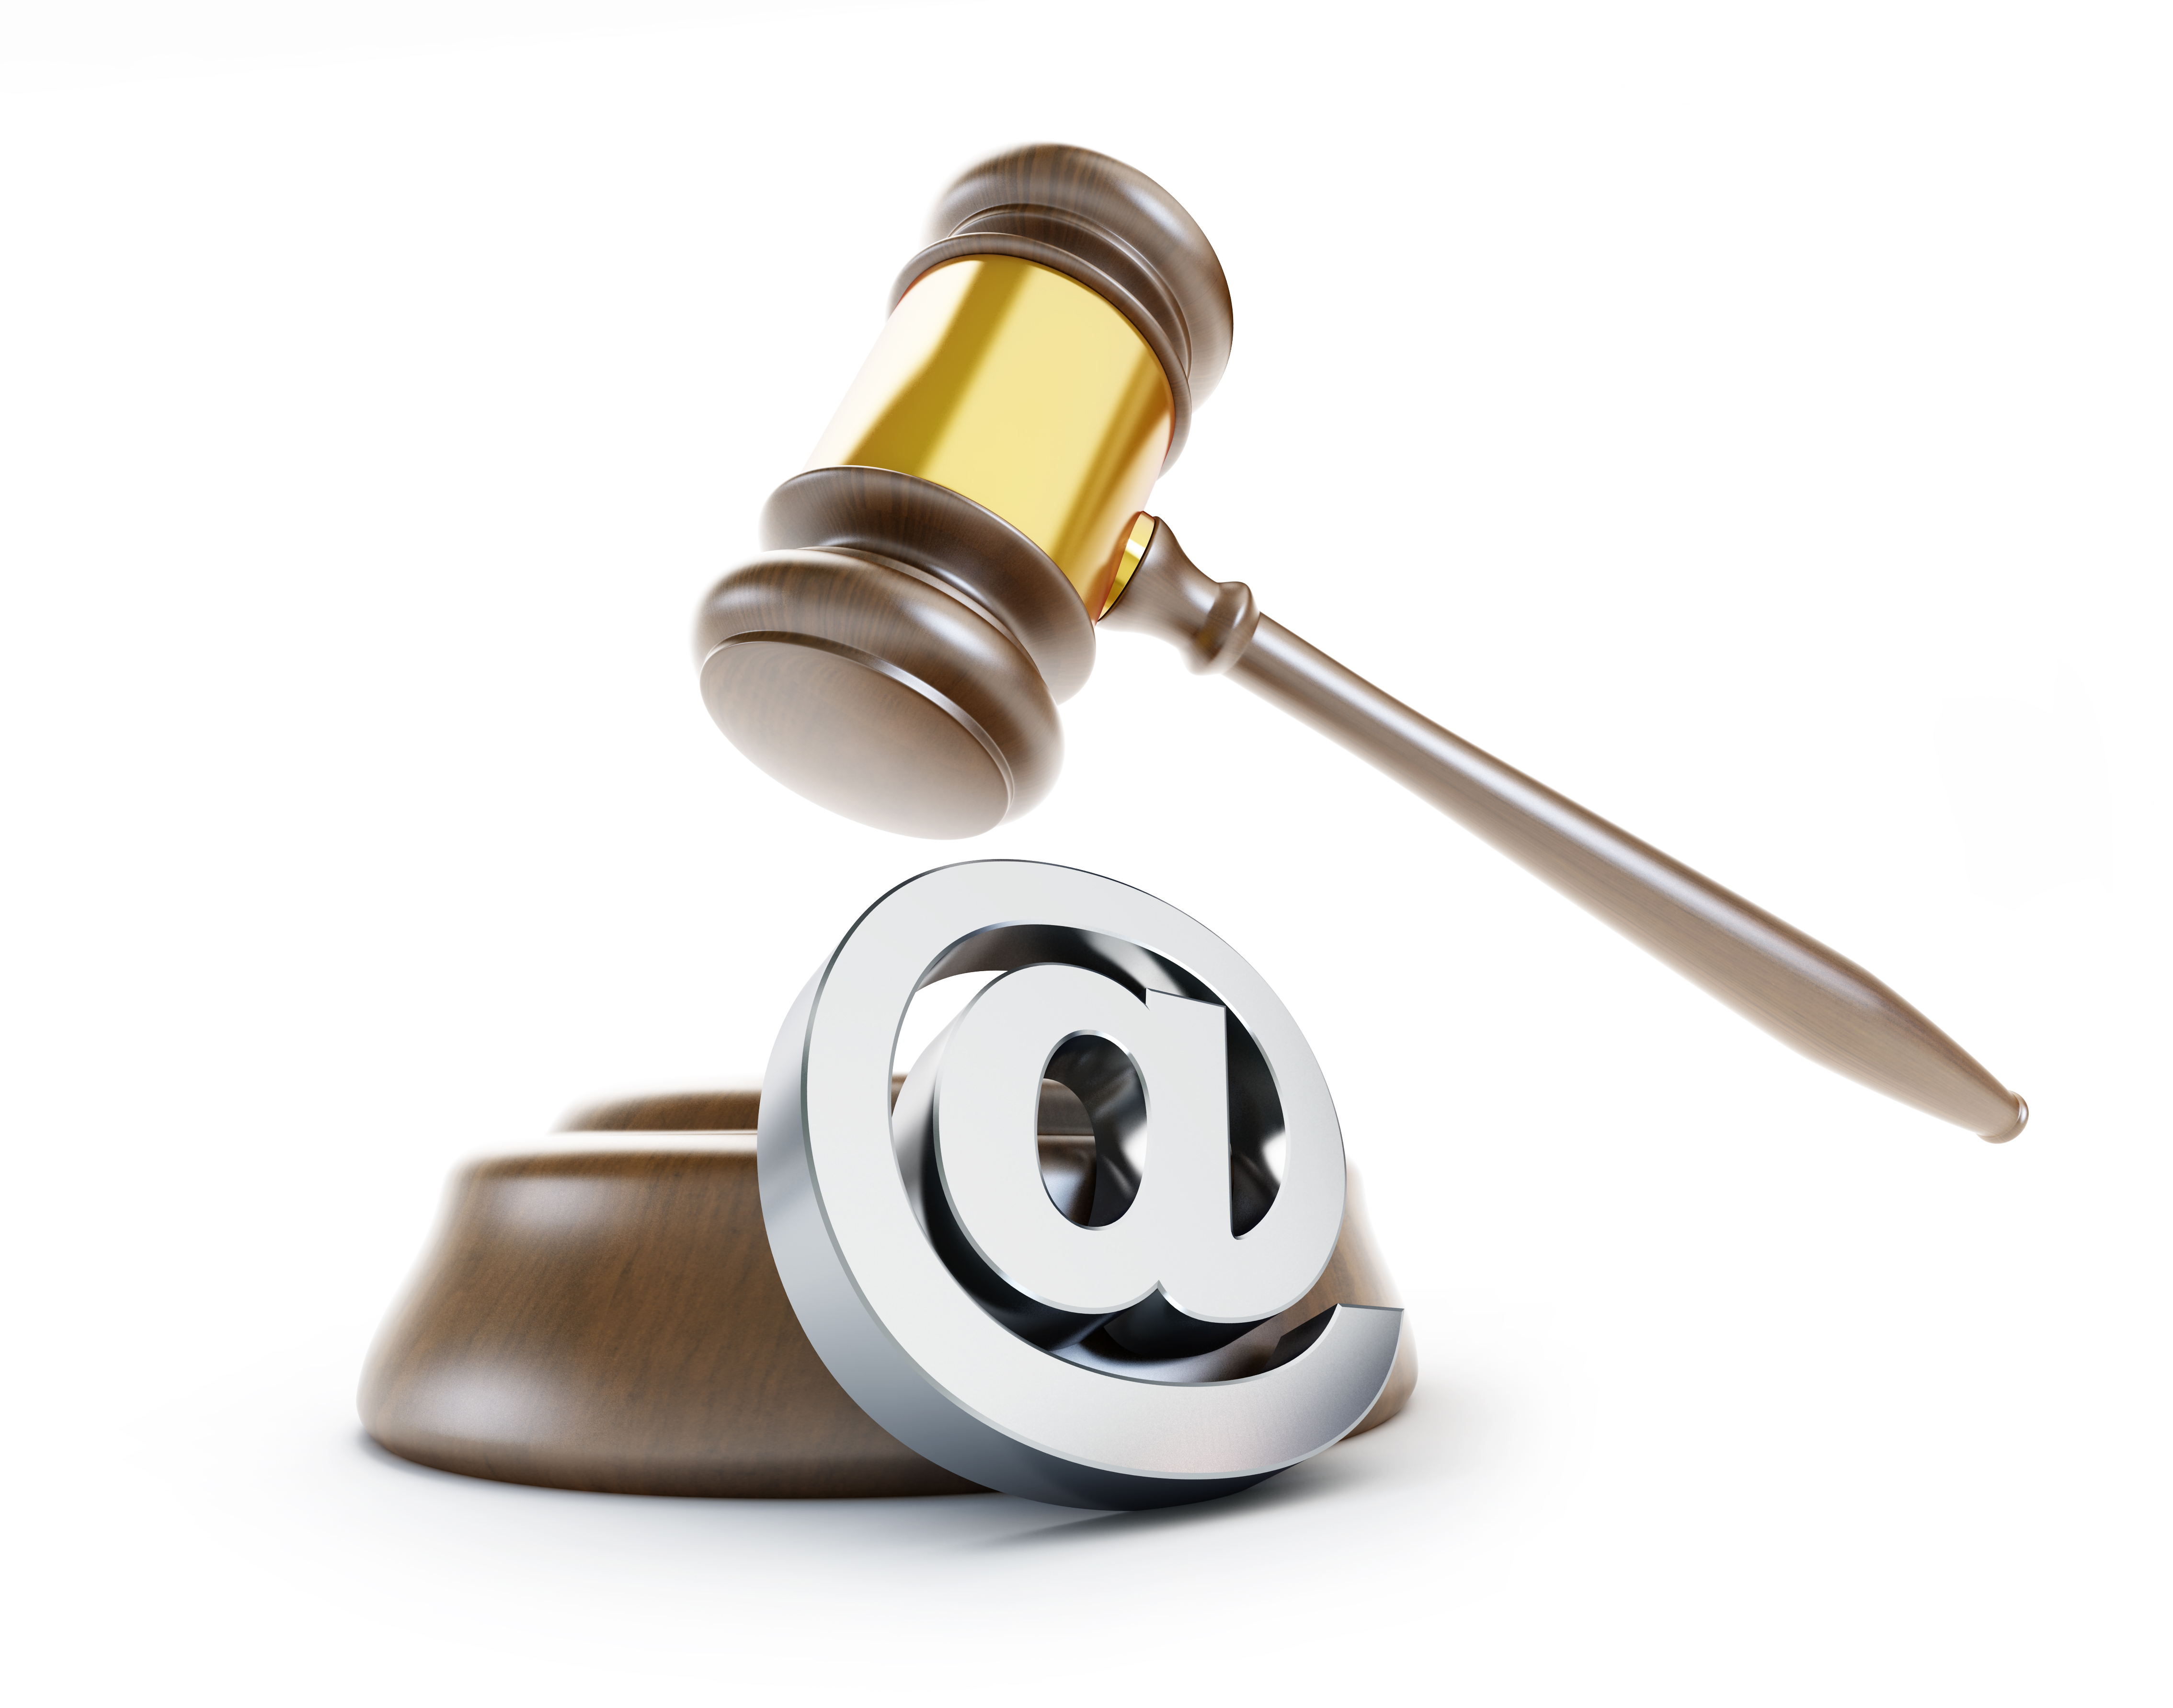 A gavel and the "at" symbol